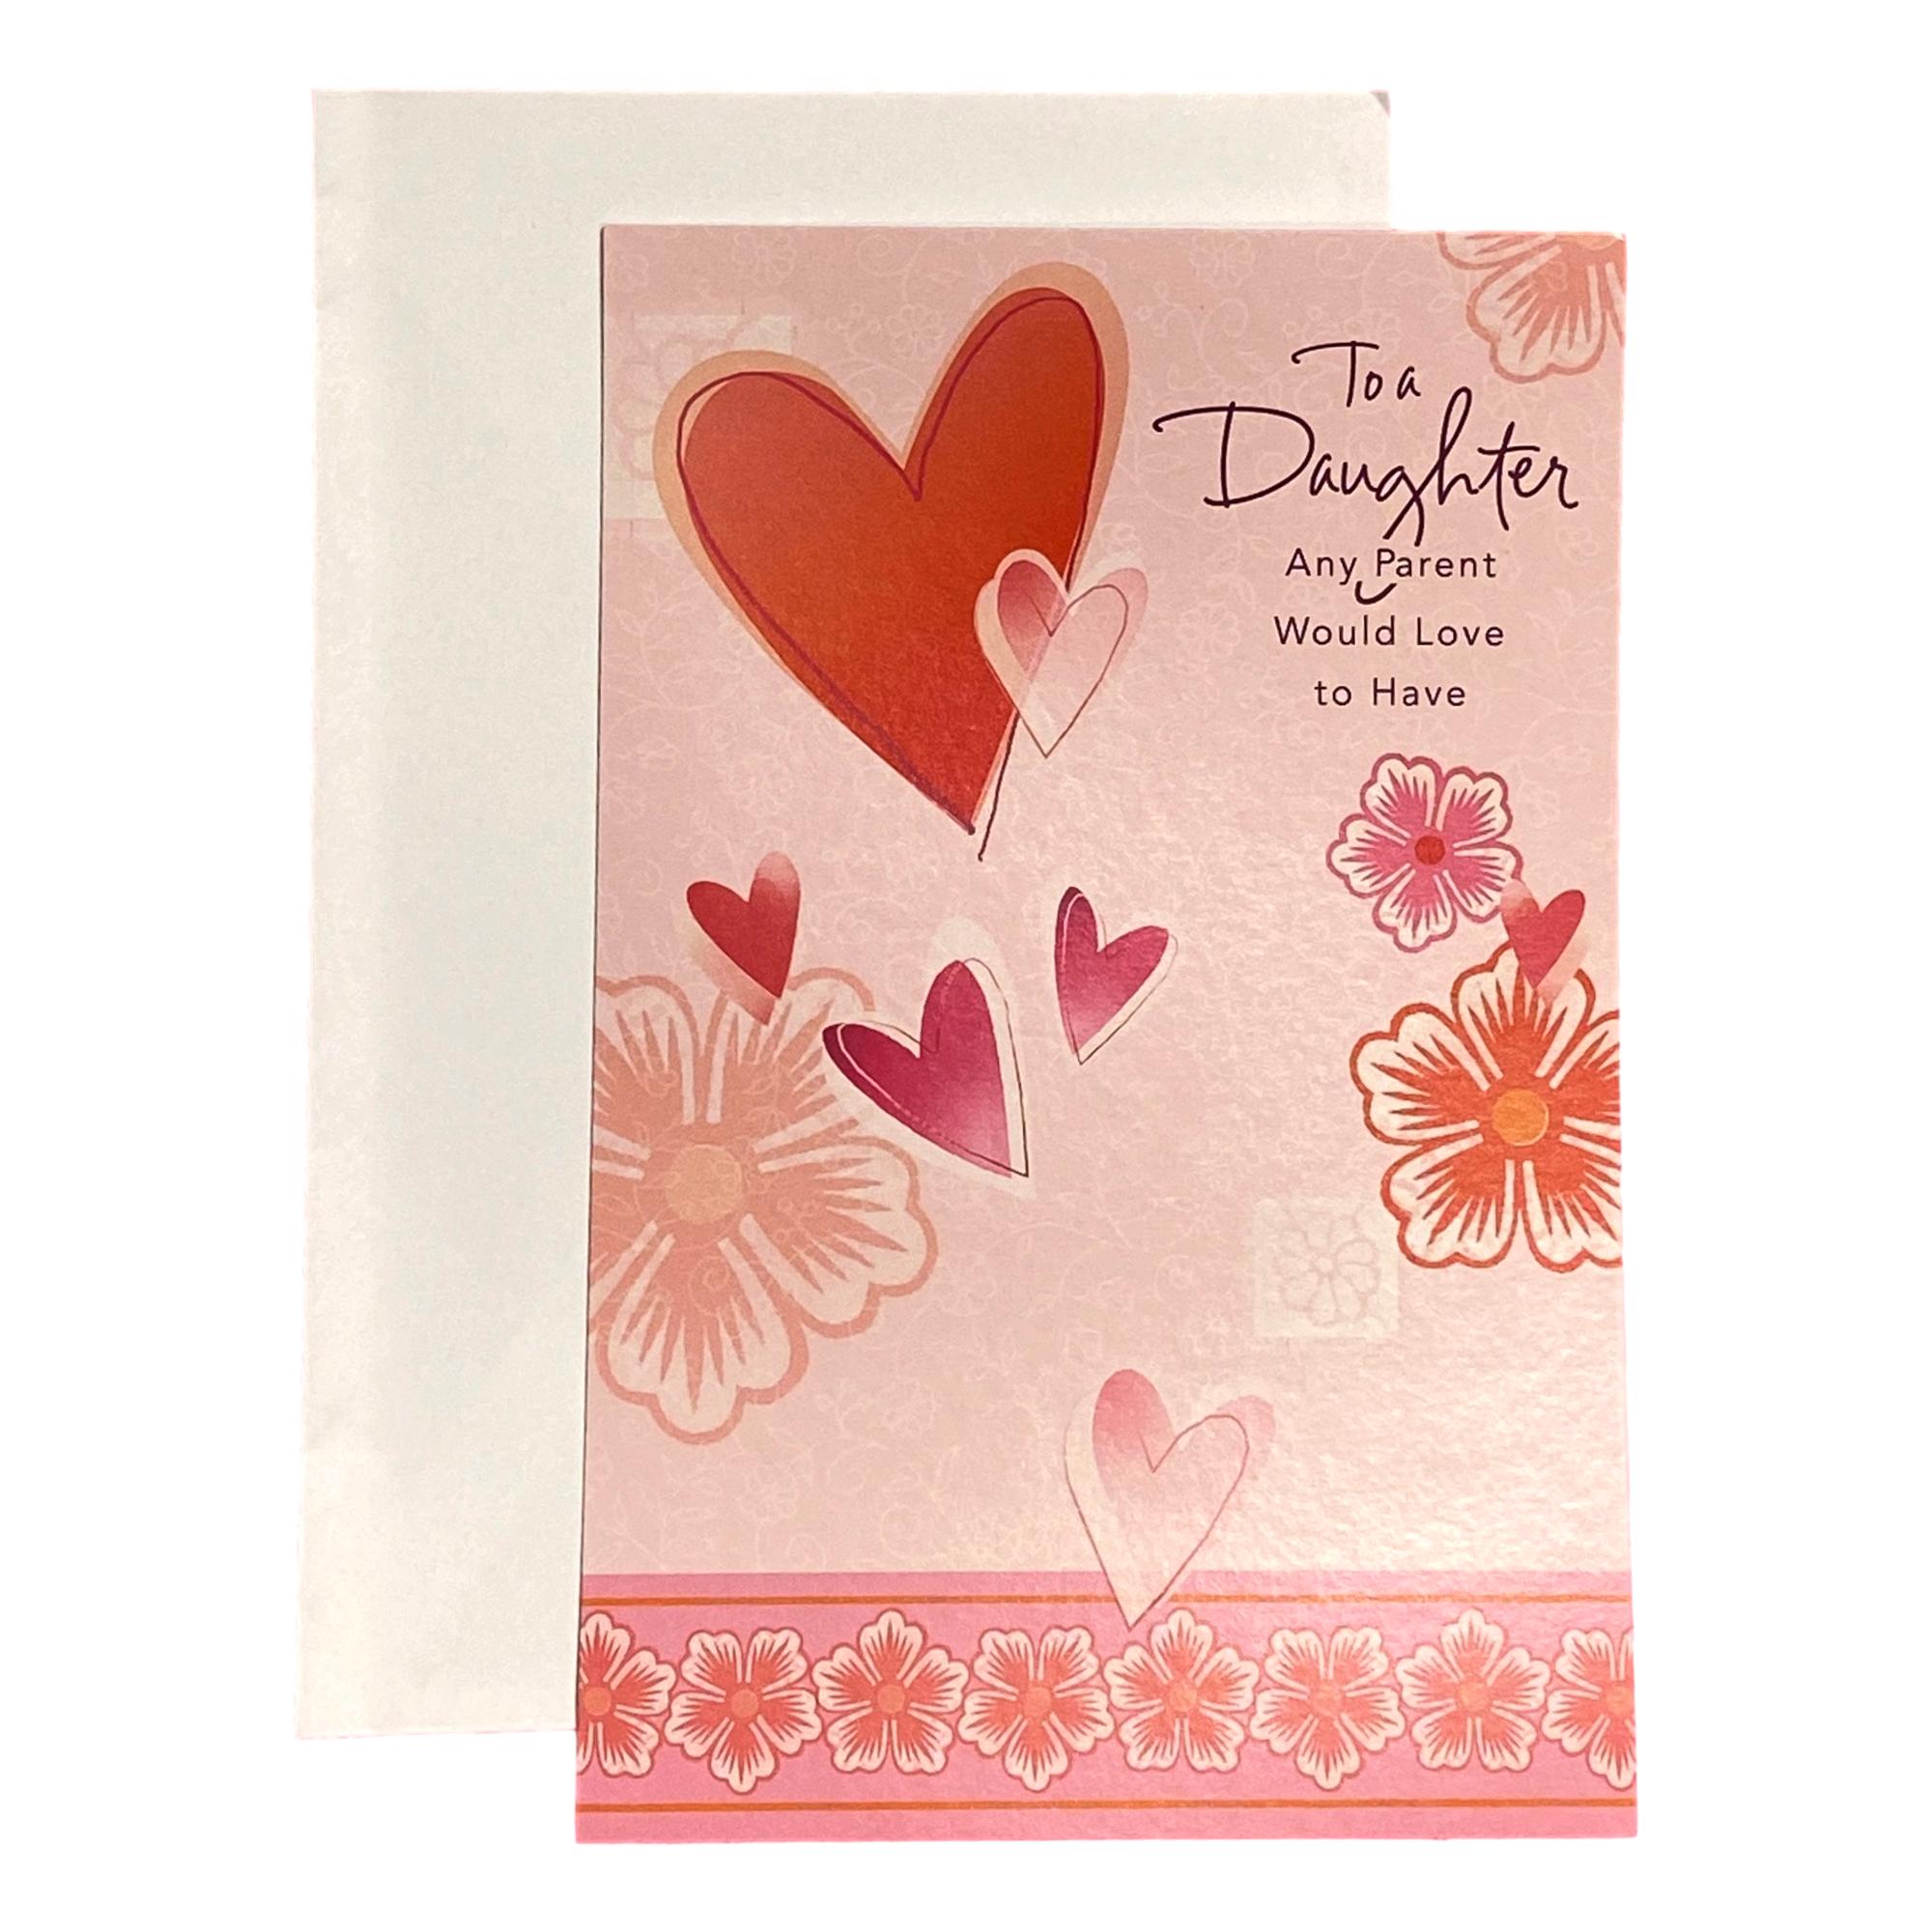 Valentine #39 s Day Greeting Card for Daughter To a Daughter Any Parent